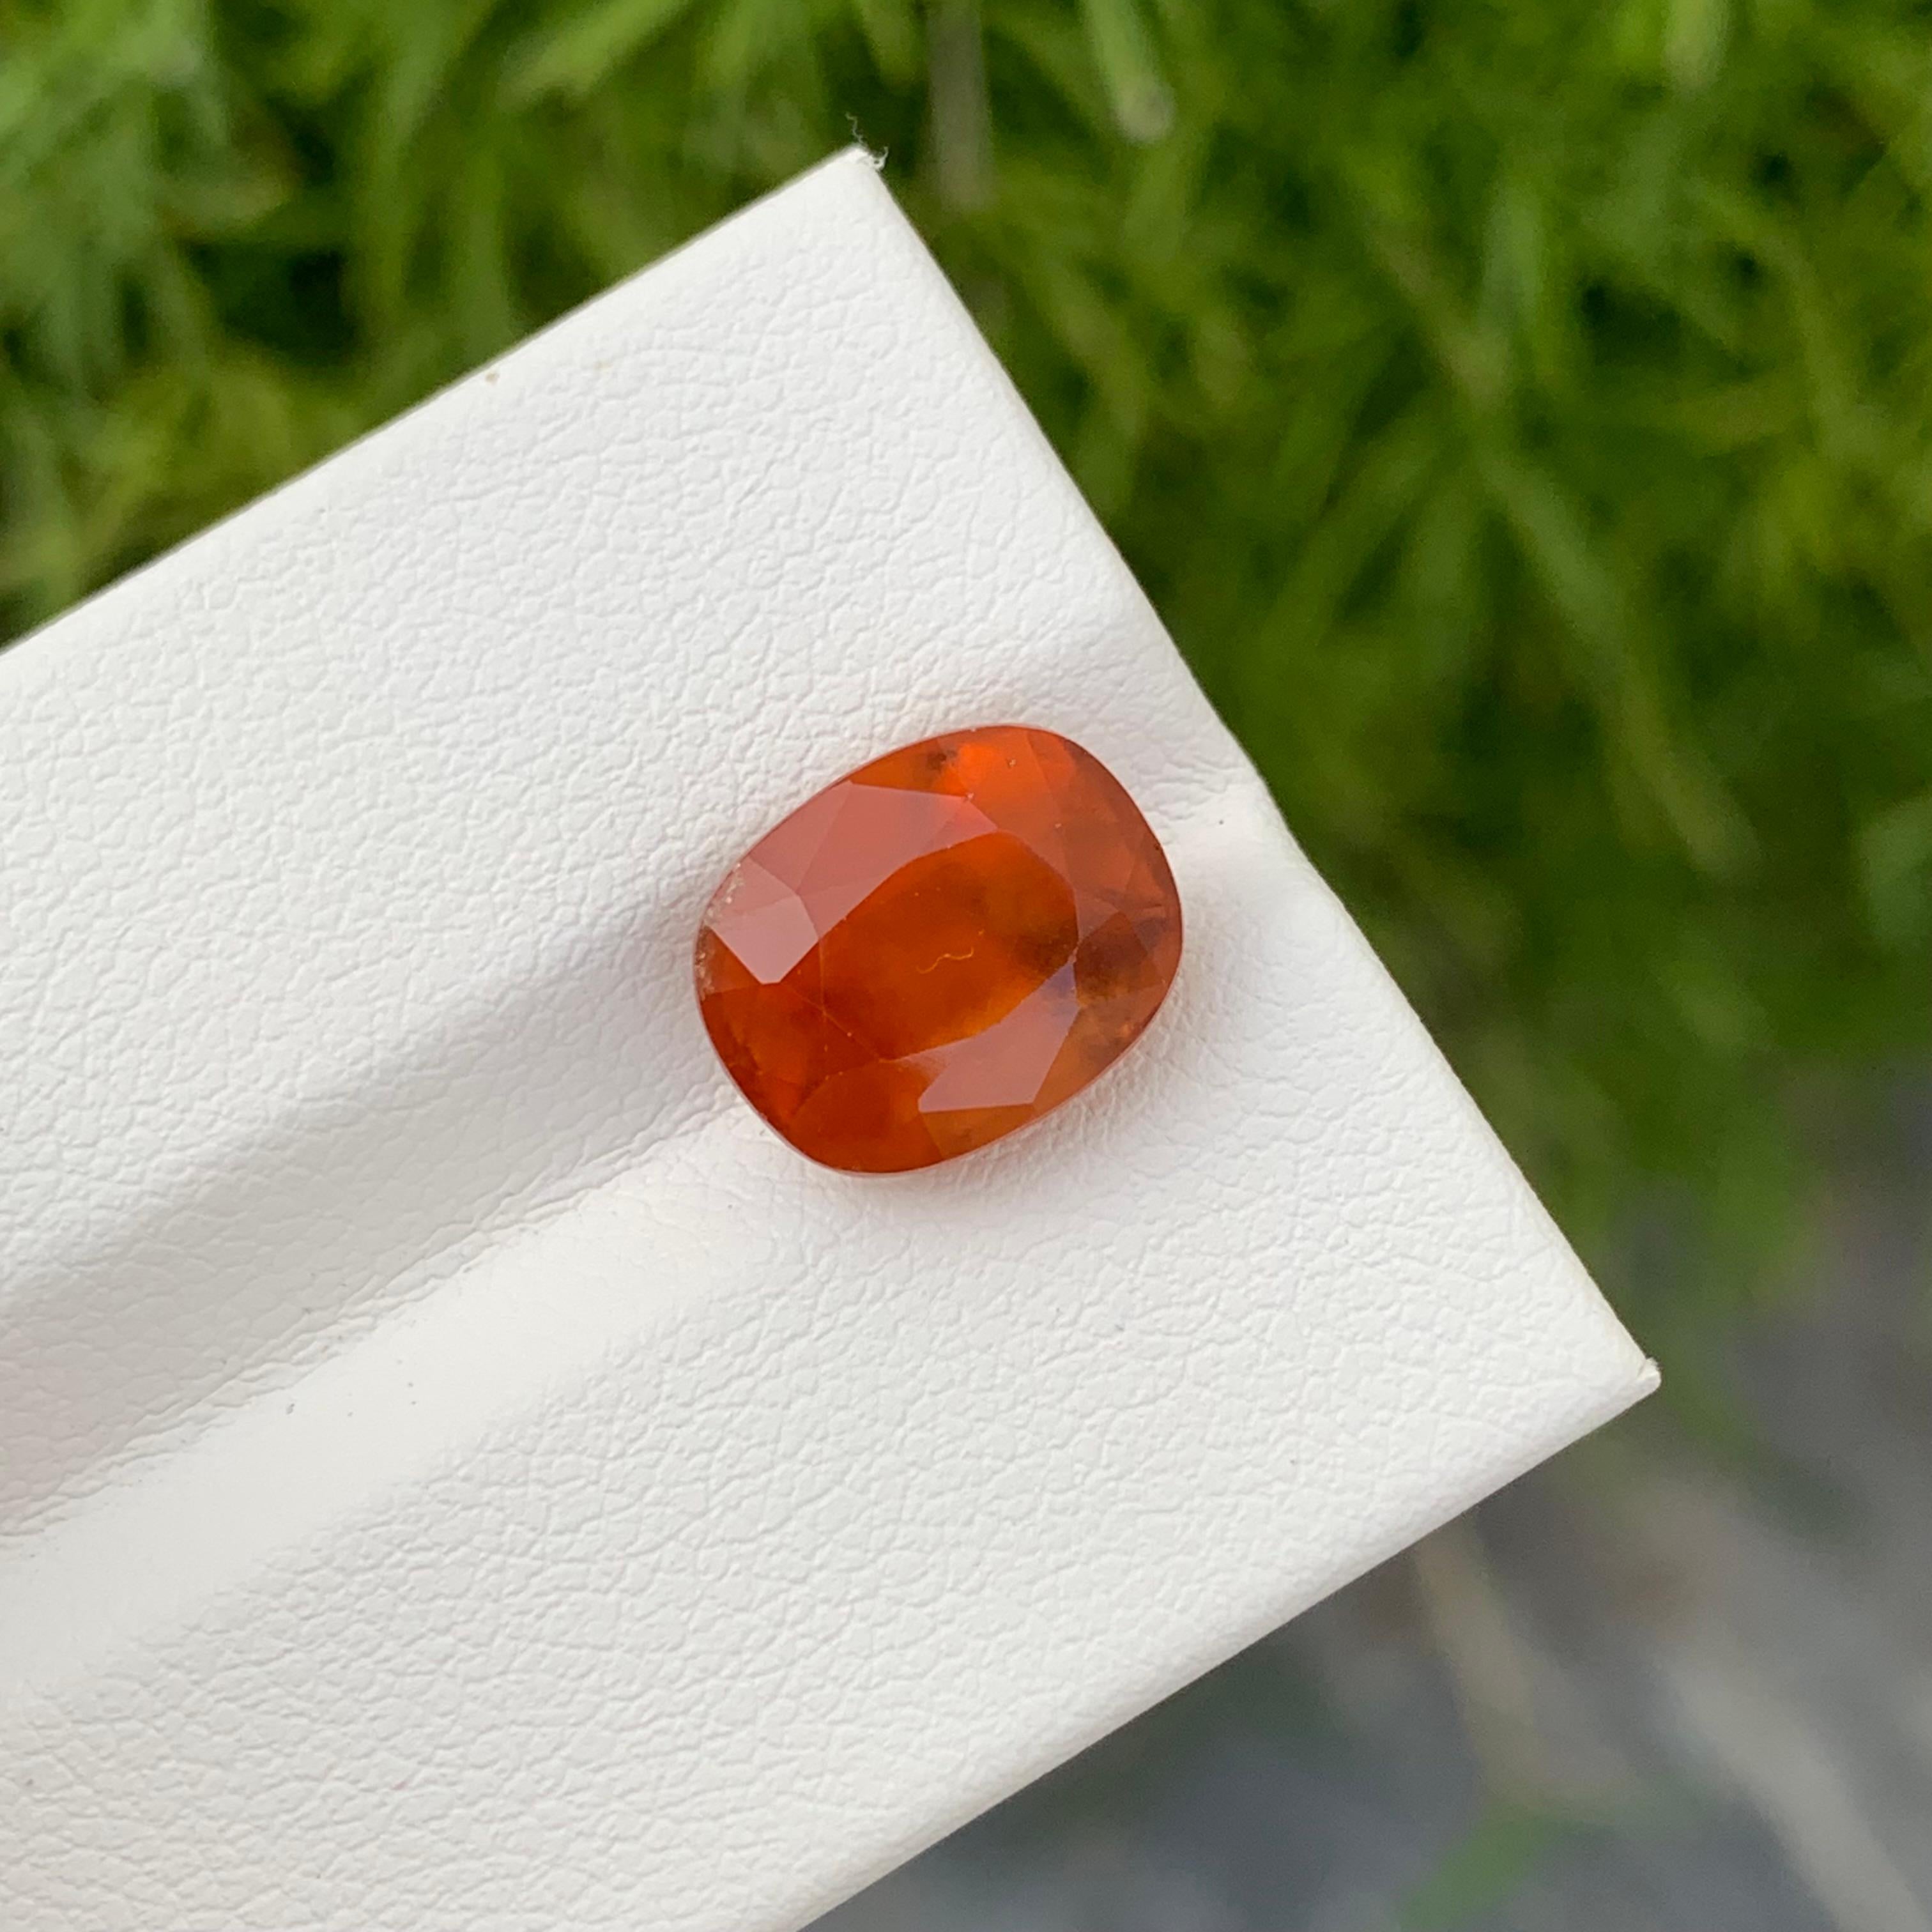 Loose Hessonite Garnet
Weight: 5.40 Carats
Dimension: 10.8 x 8.7 x 7.2 Mm
Colour: Smoky Orange
Cut: Cushion
Certificate: On Demand

Hessonite garnet, also known as cinnamon stone or gomedh, is a captivating gemstone renowned for its warm hues and